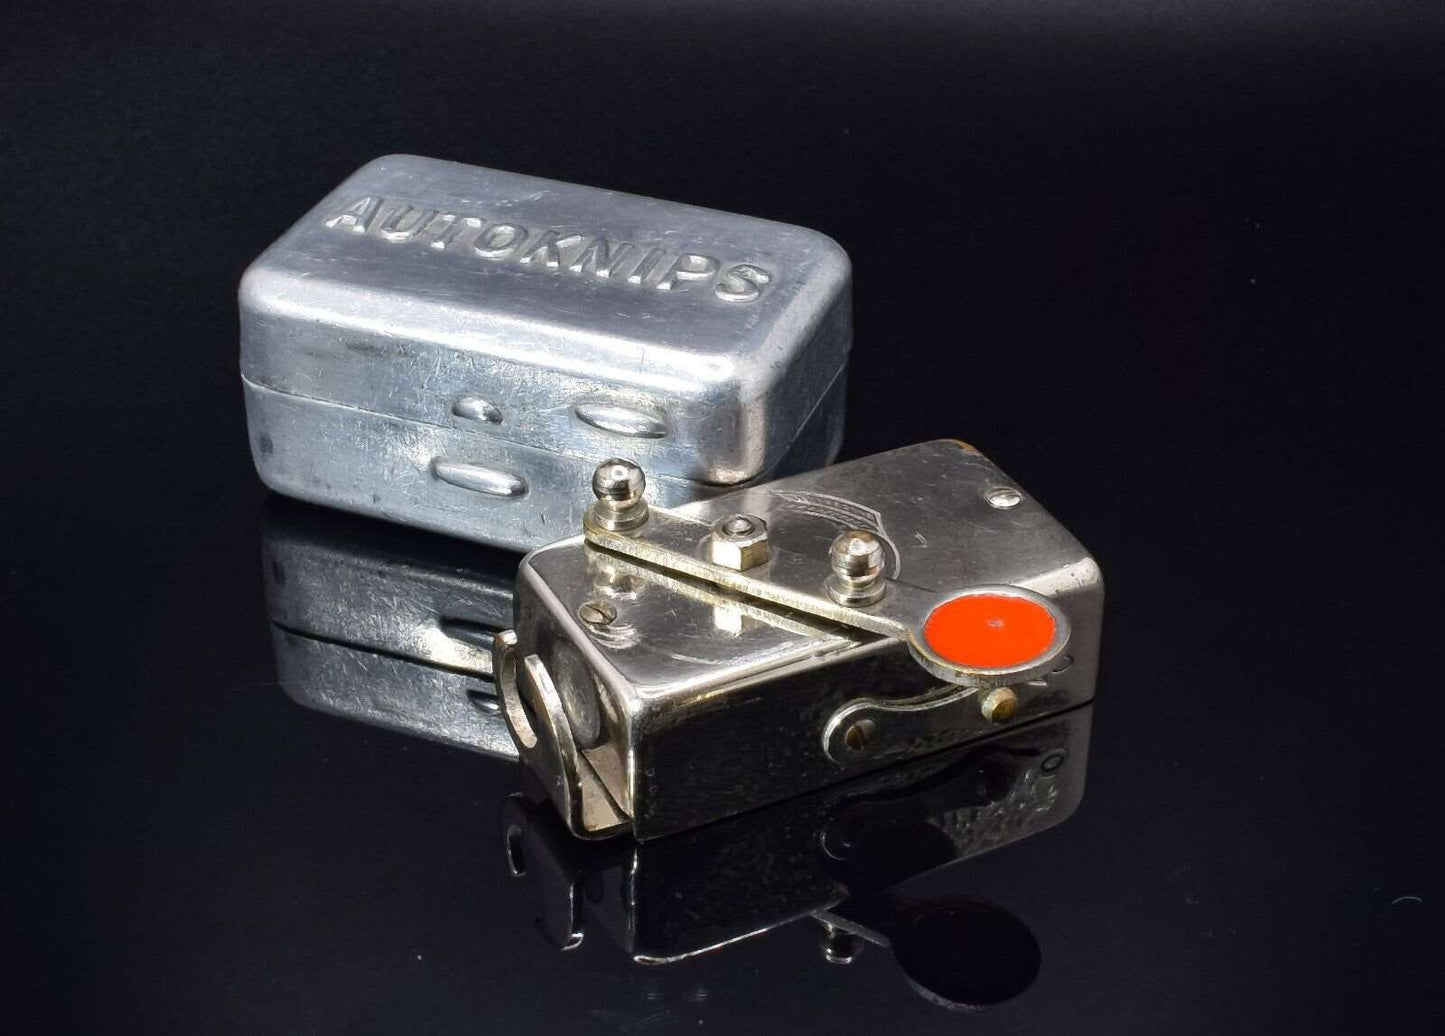 Vintage Haka Autoknips 1 Self Timer for Shutter Release Made in Germany 1920's